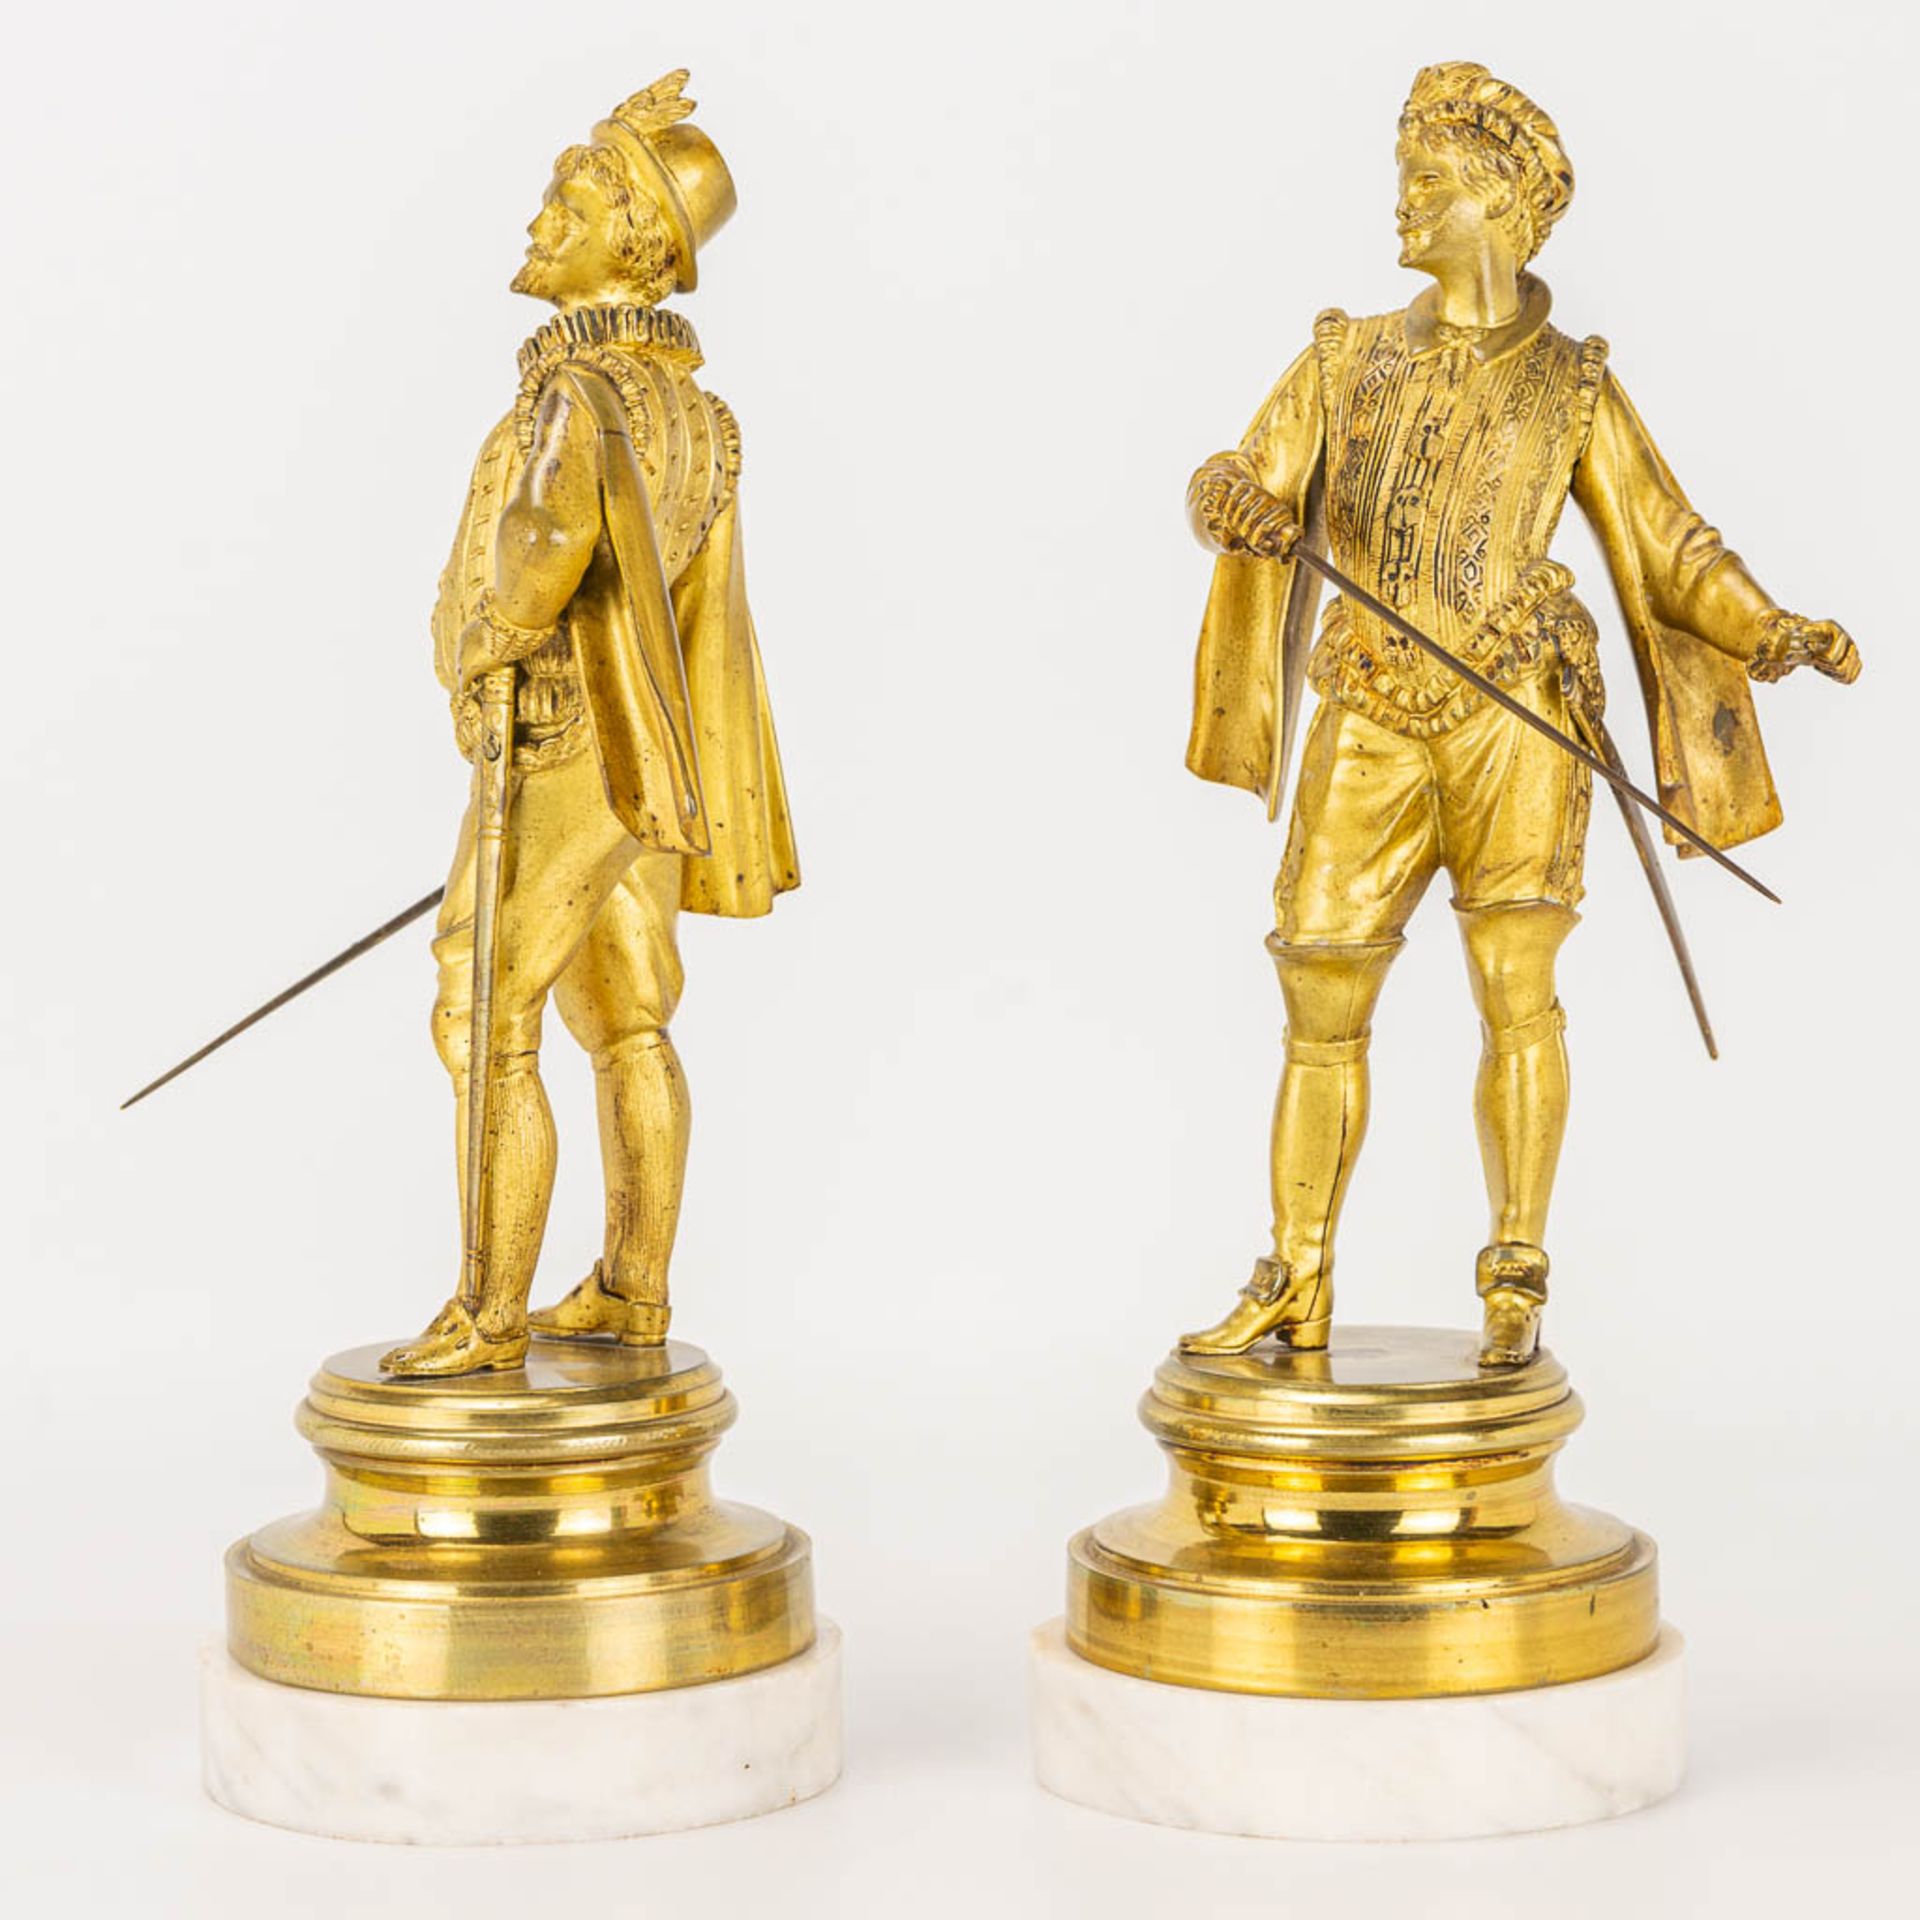 A pair of gilt Conquistadores statues made of gilt bronze and standing on a white marble base. - Image 5 of 9